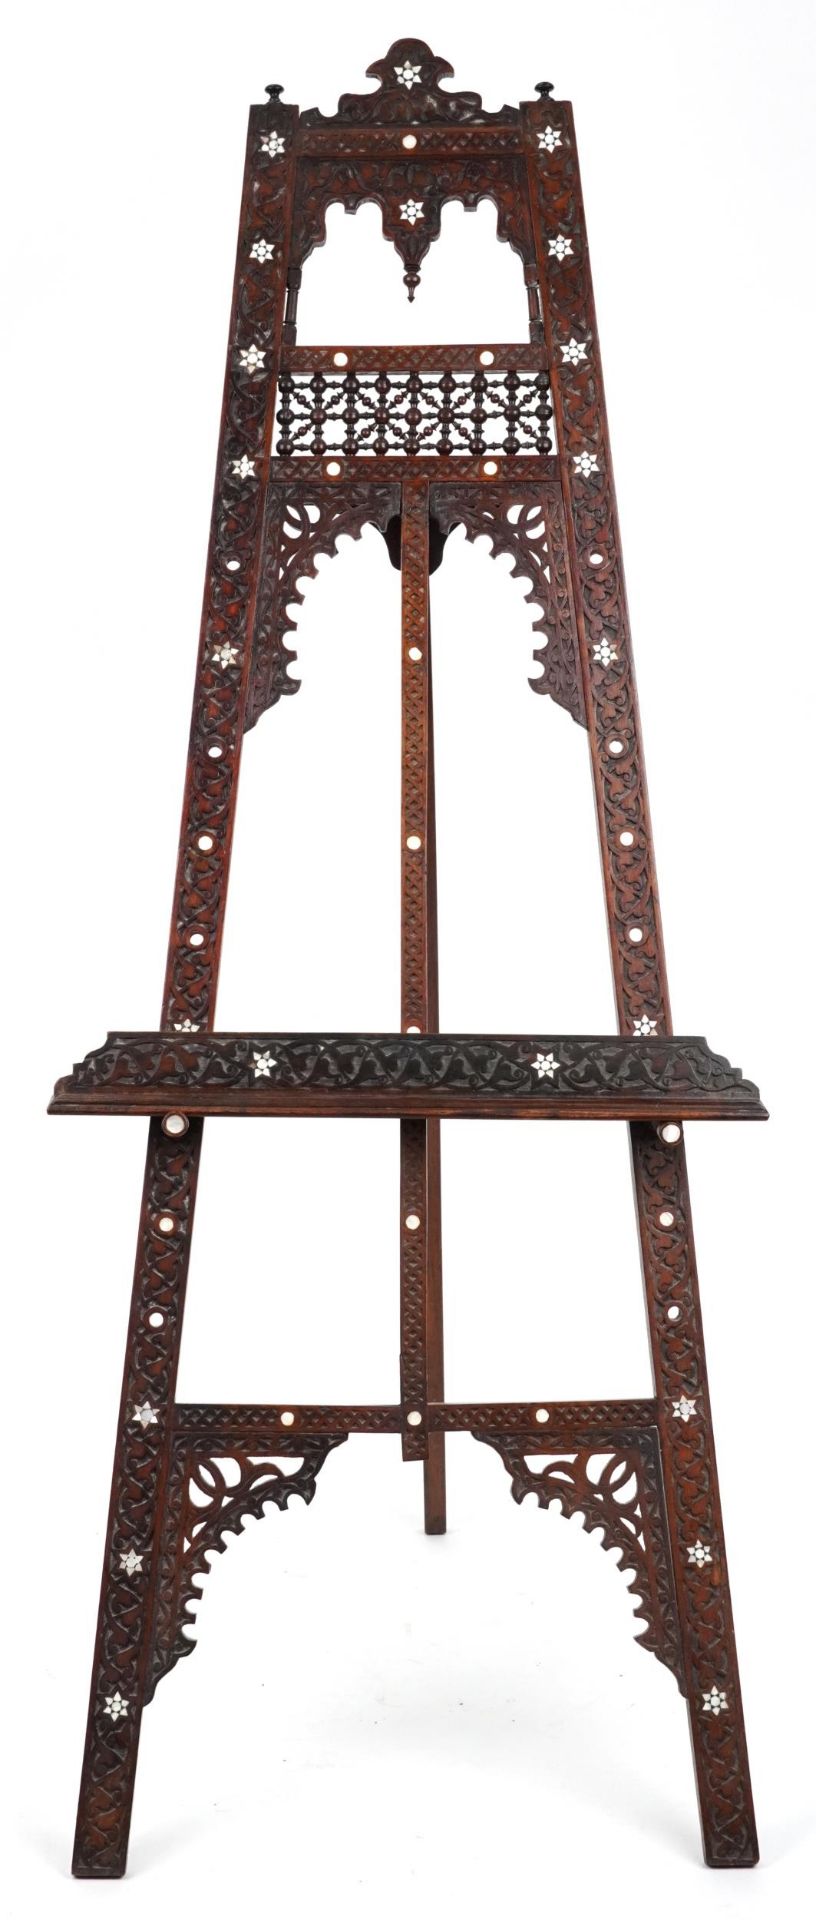 Attributed to Liberty & So, Moorish hardwood floor standing easel with mother of pearl inlay - Image 2 of 3